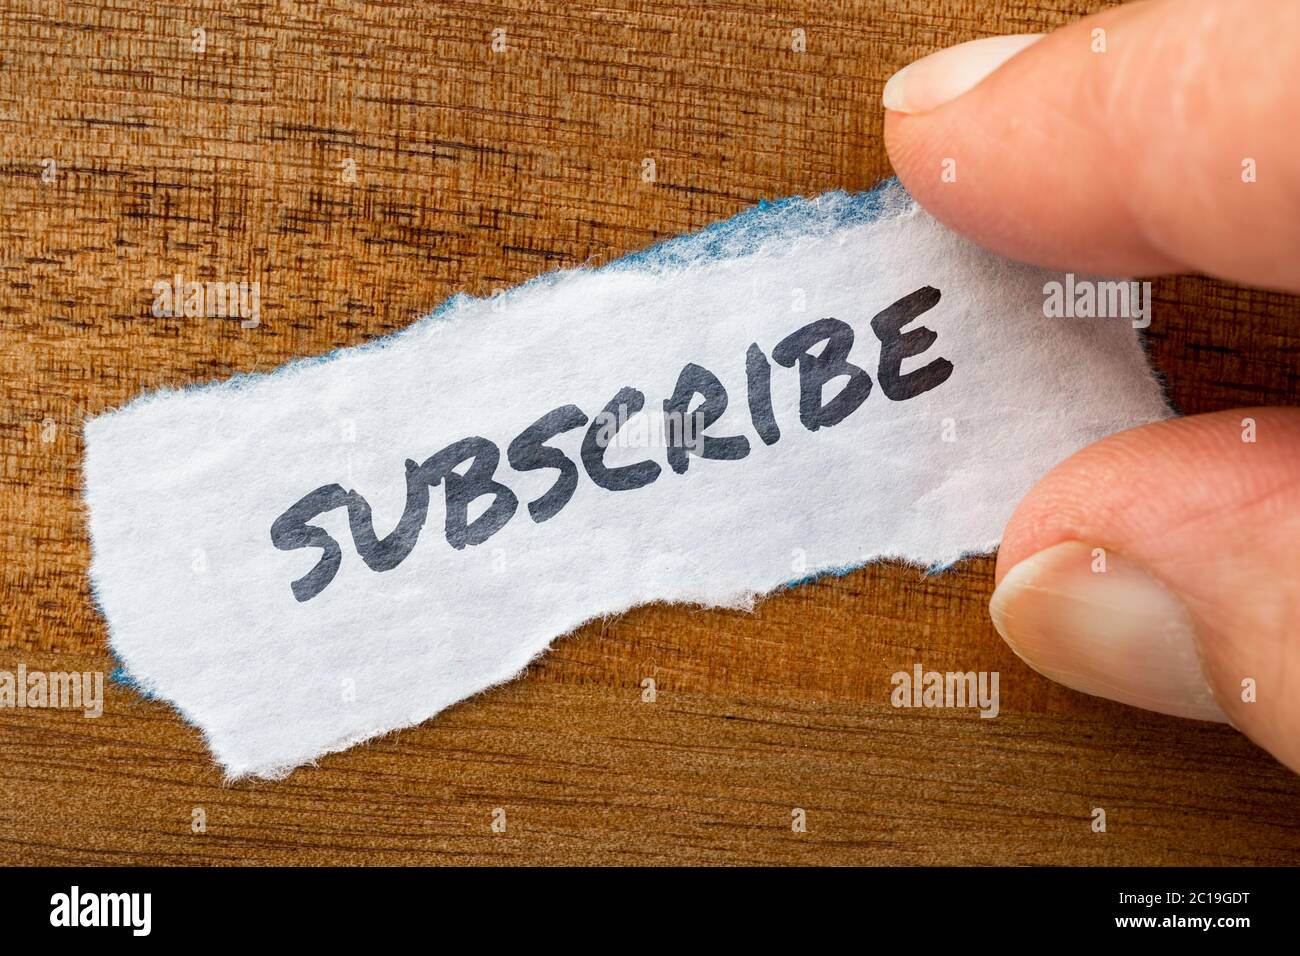 Subscribe concept and theme written on old paper on a grunge background Stock Photo